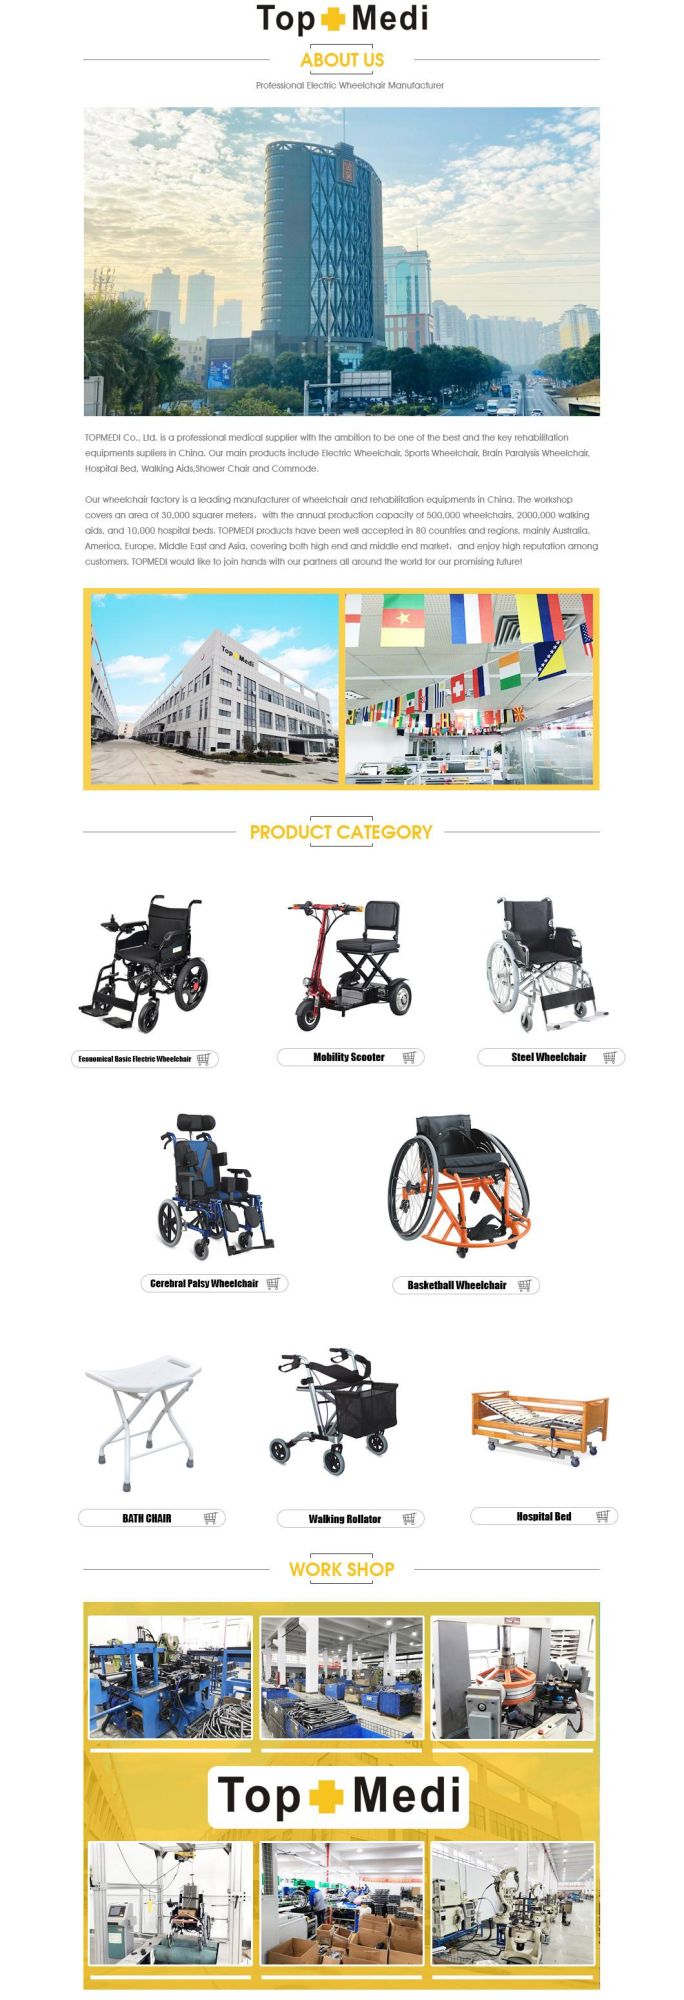 ISO Approved New Medical Equipment Transfer Toilet Commode Shower Automatic Commode Wheelchair Chair